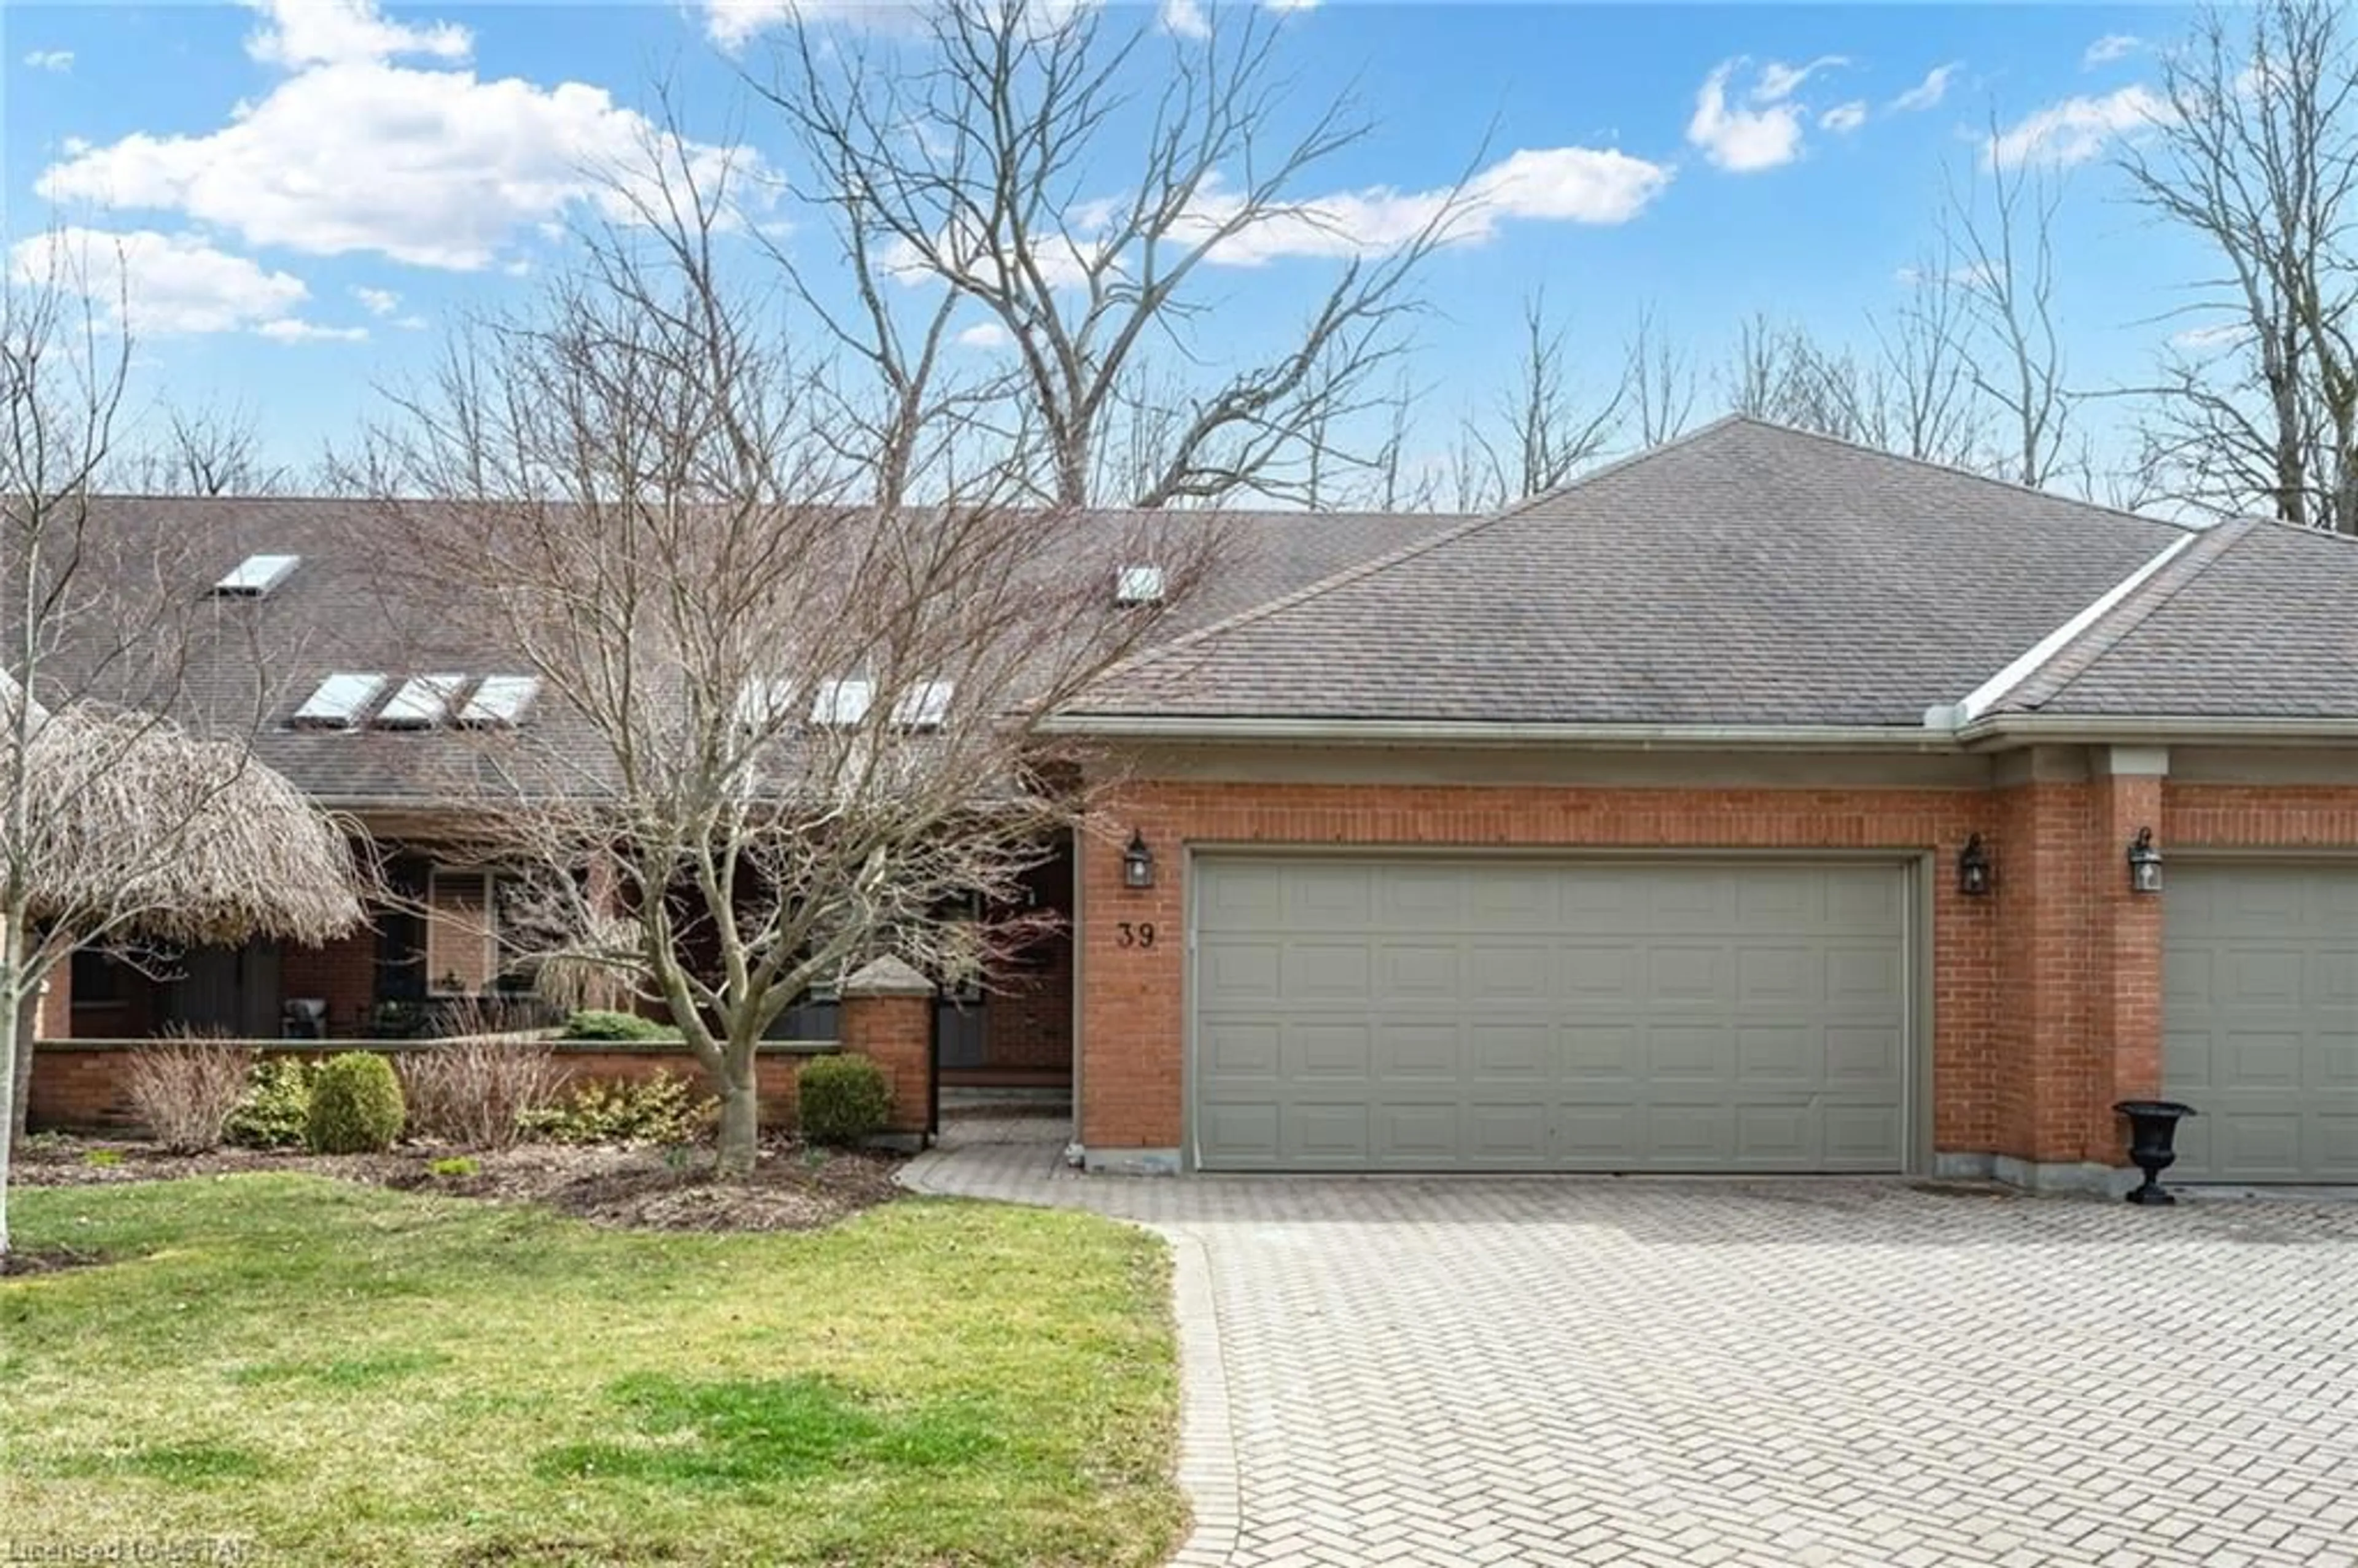 Home with brick exterior material for 40 Quinella Dr #39, London Ontario N6K 4K9